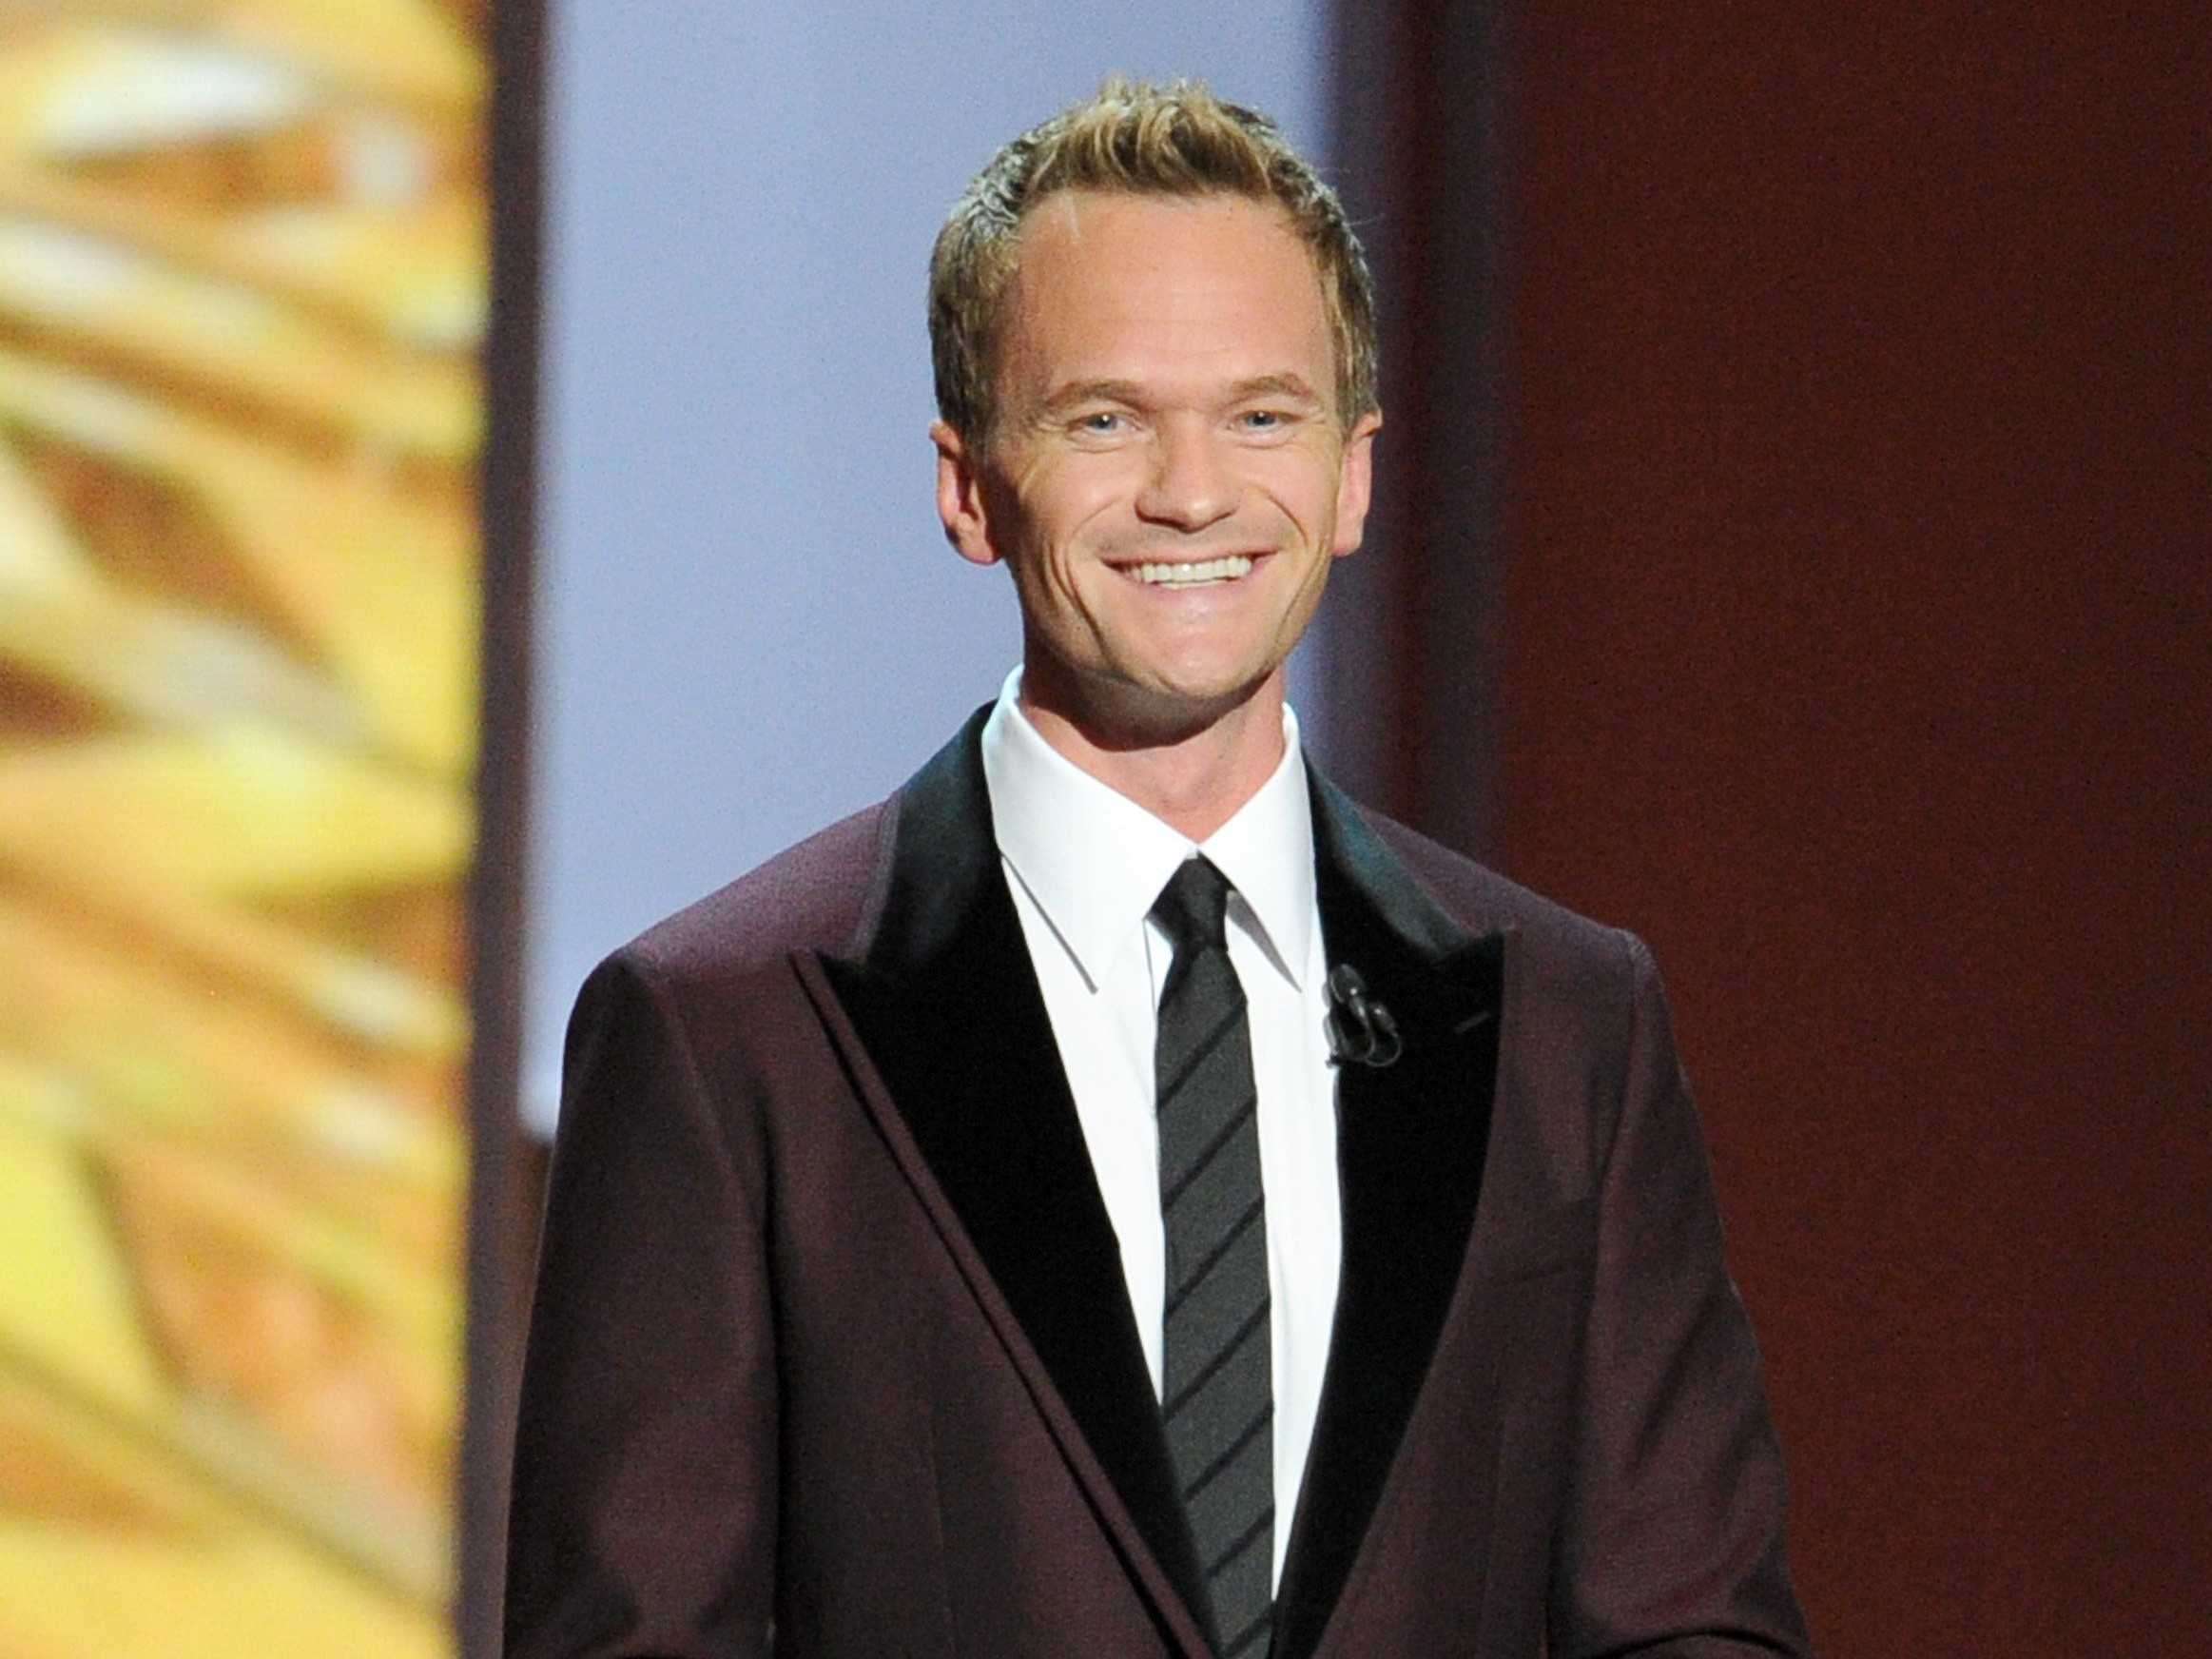 Neil Patrick Harris Coming Out